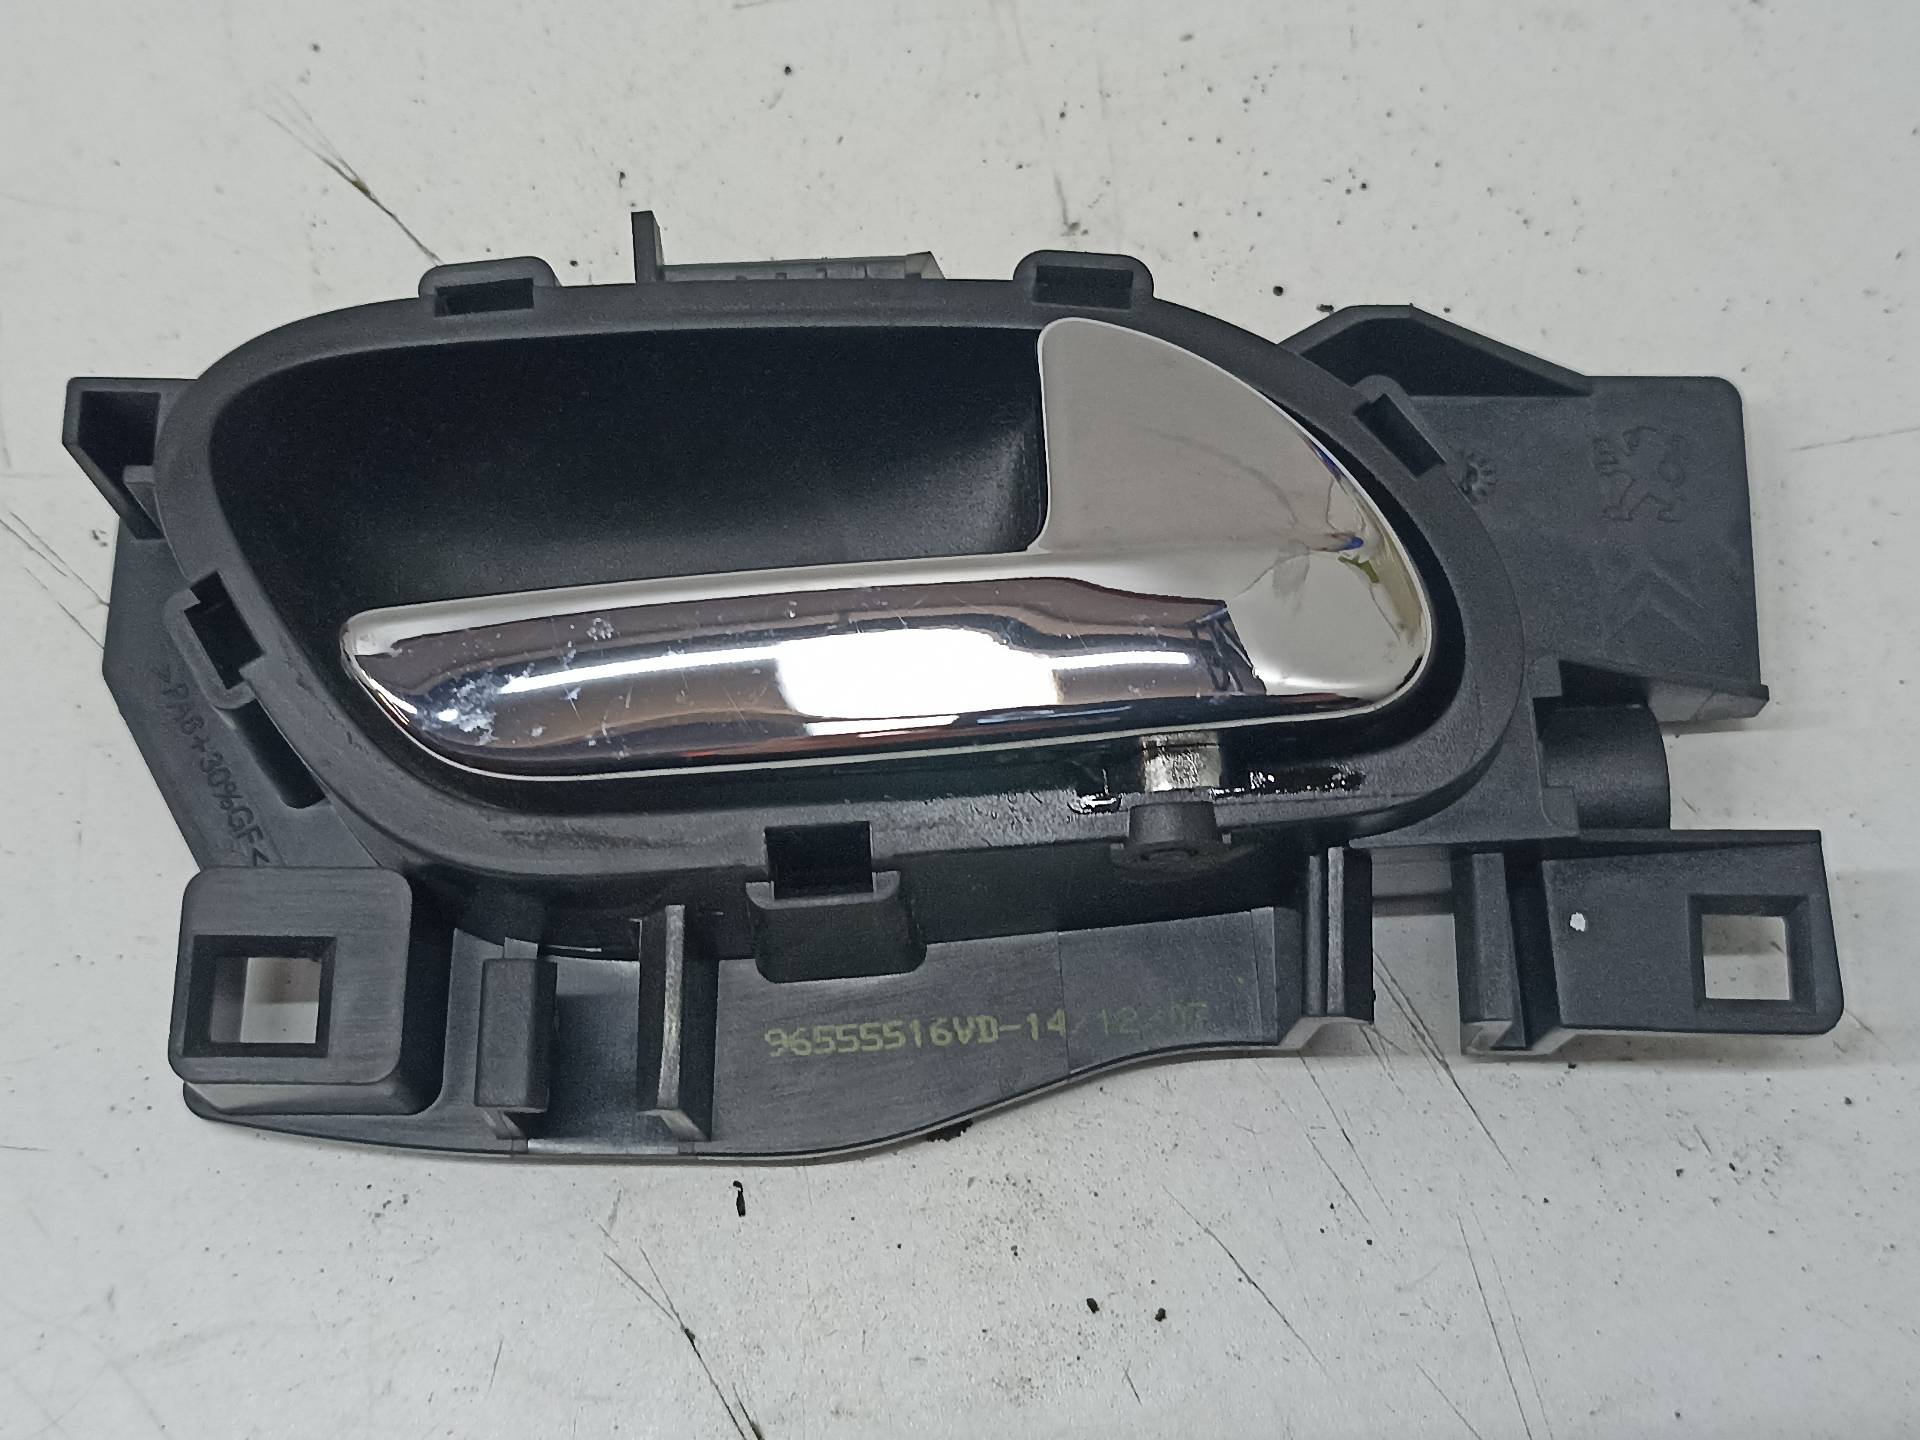 PEUGEOT 207 1 generation (2006-2009) Other Interior Parts 96555516VD, 326754175145, 145 24315121